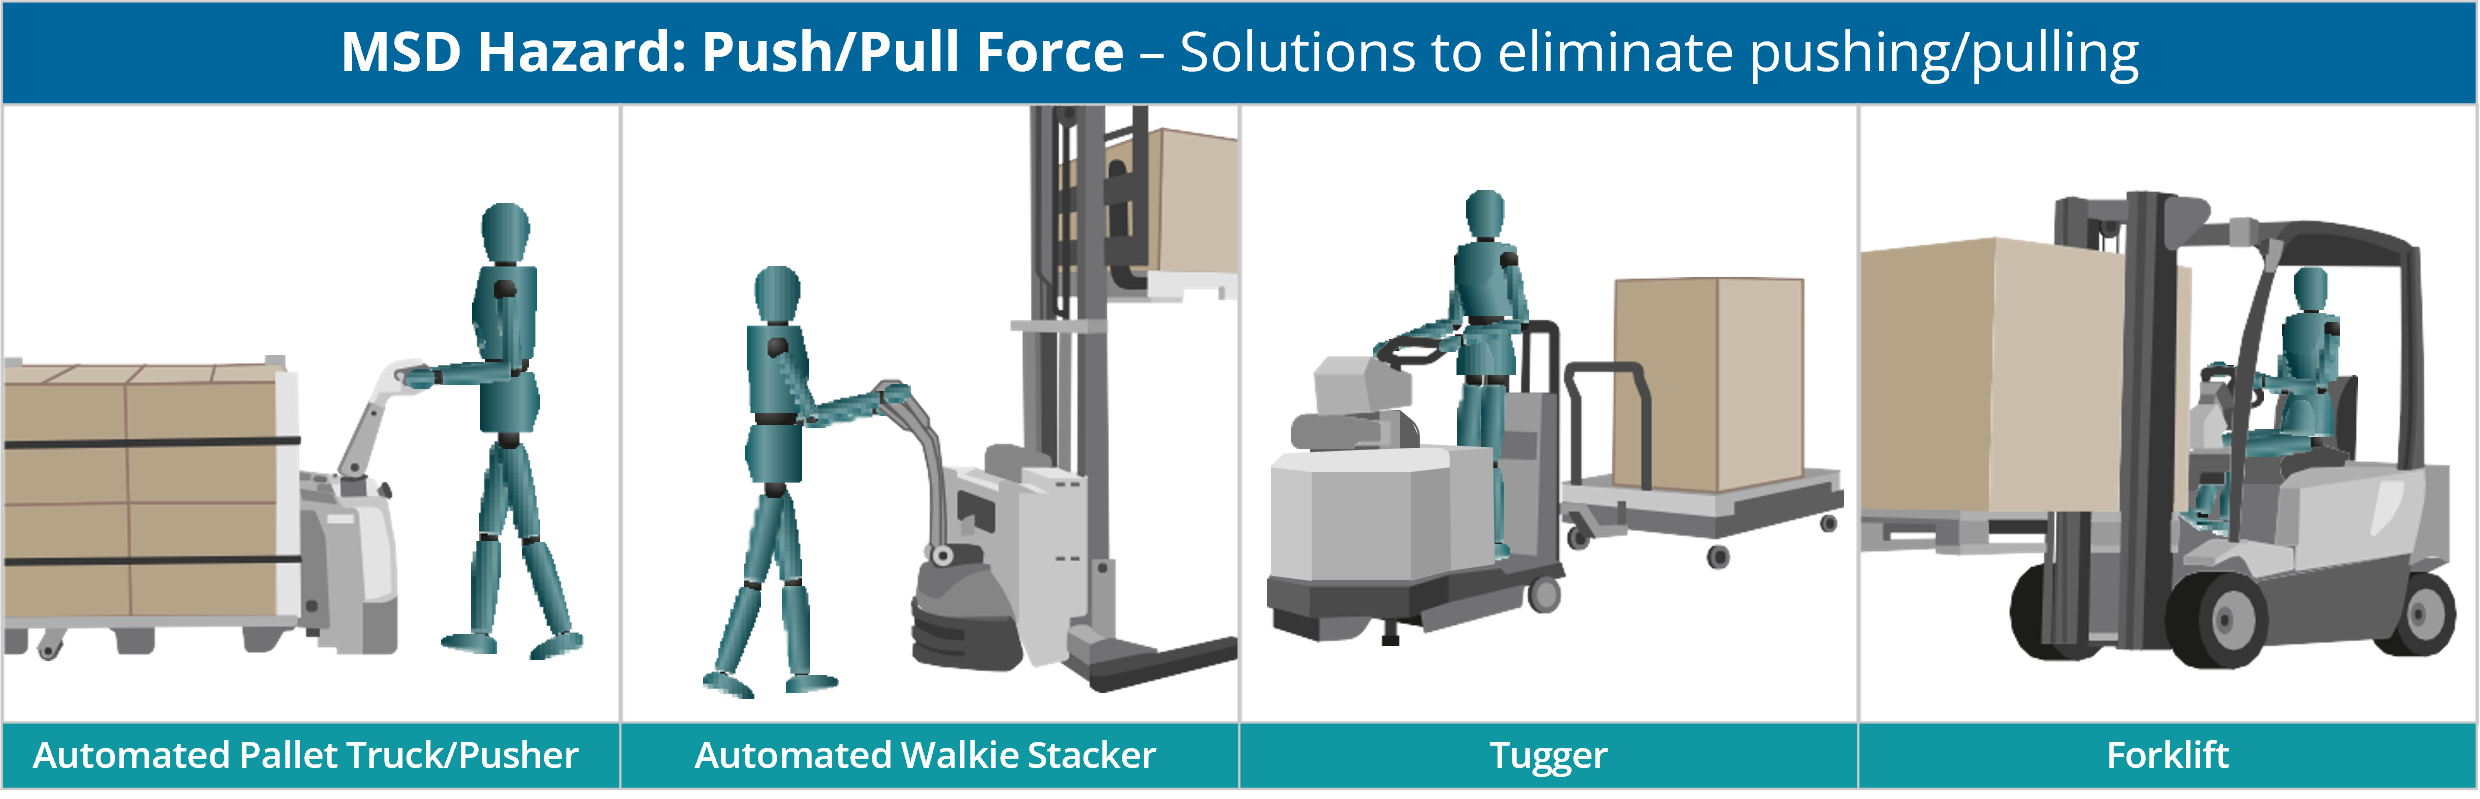 Image form Manual materials handling poster. MSD Hazard: push/pull force, solutions to eliminate pushing and pulling. Solutions shown: automated pallet truck/pusher, automated walkie stacker, tugger, forklift. 